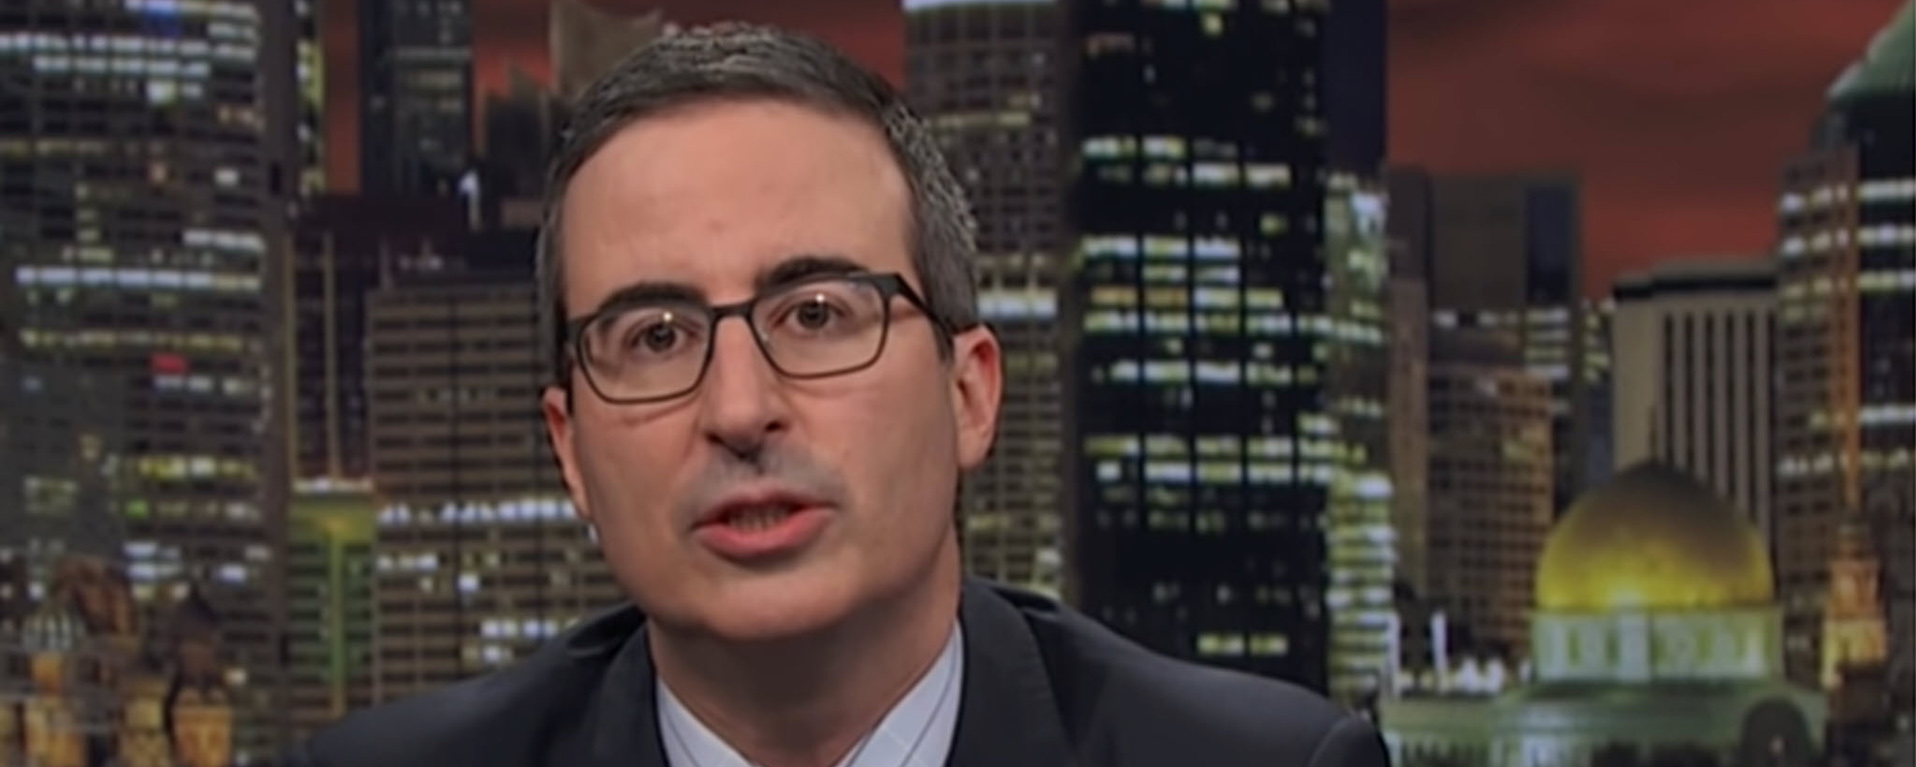 How Should the Industry Respond to John Oliver&#039;s Expose?